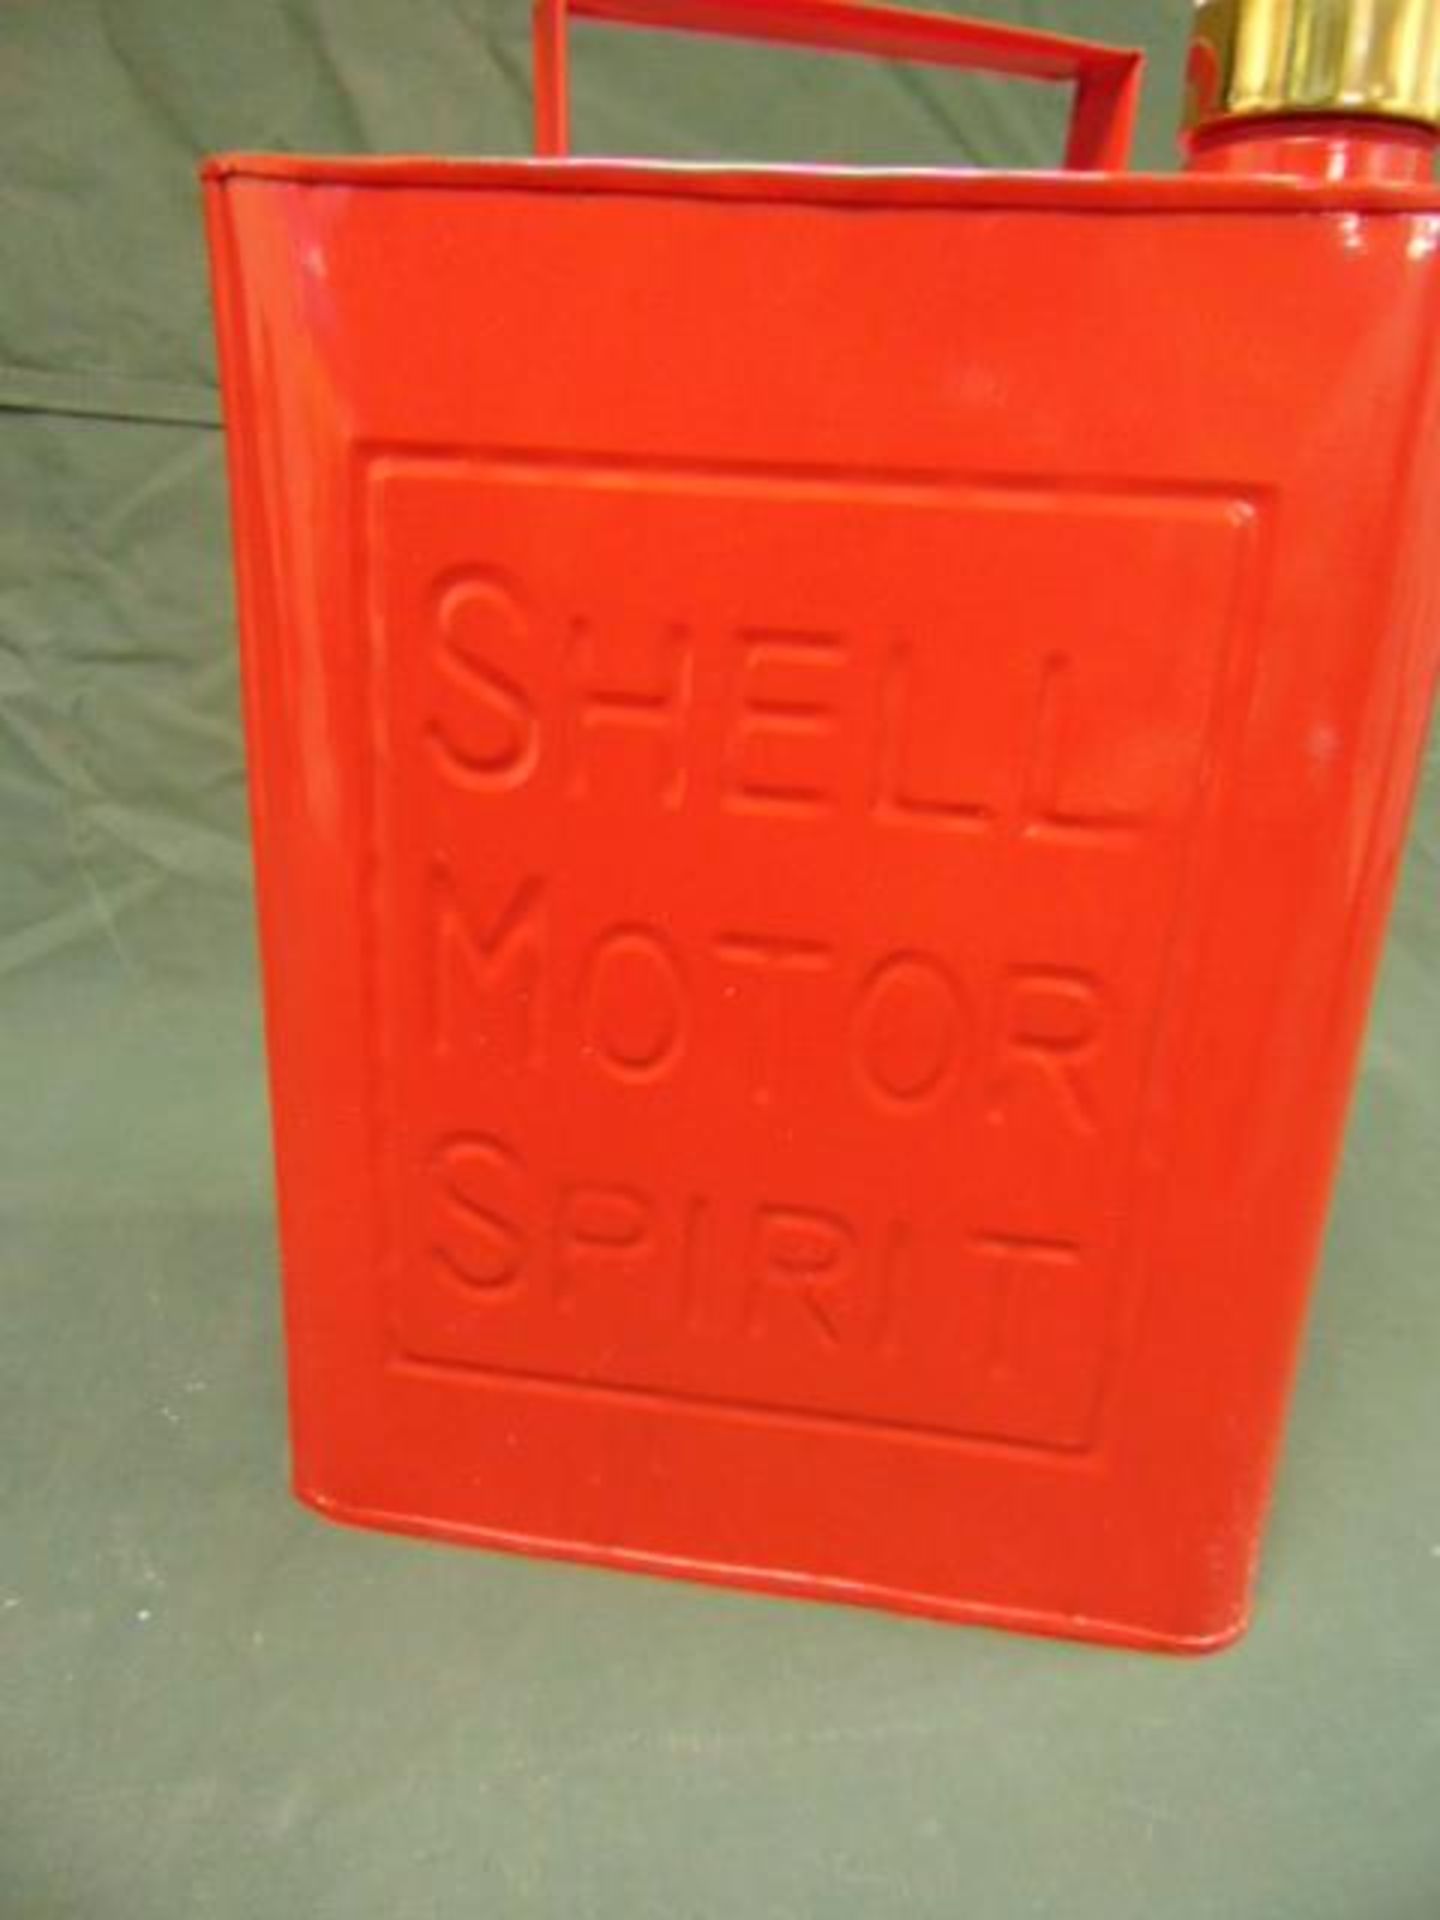 Shell Motor Spirit Oil/Fuel Can - Image 2 of 4